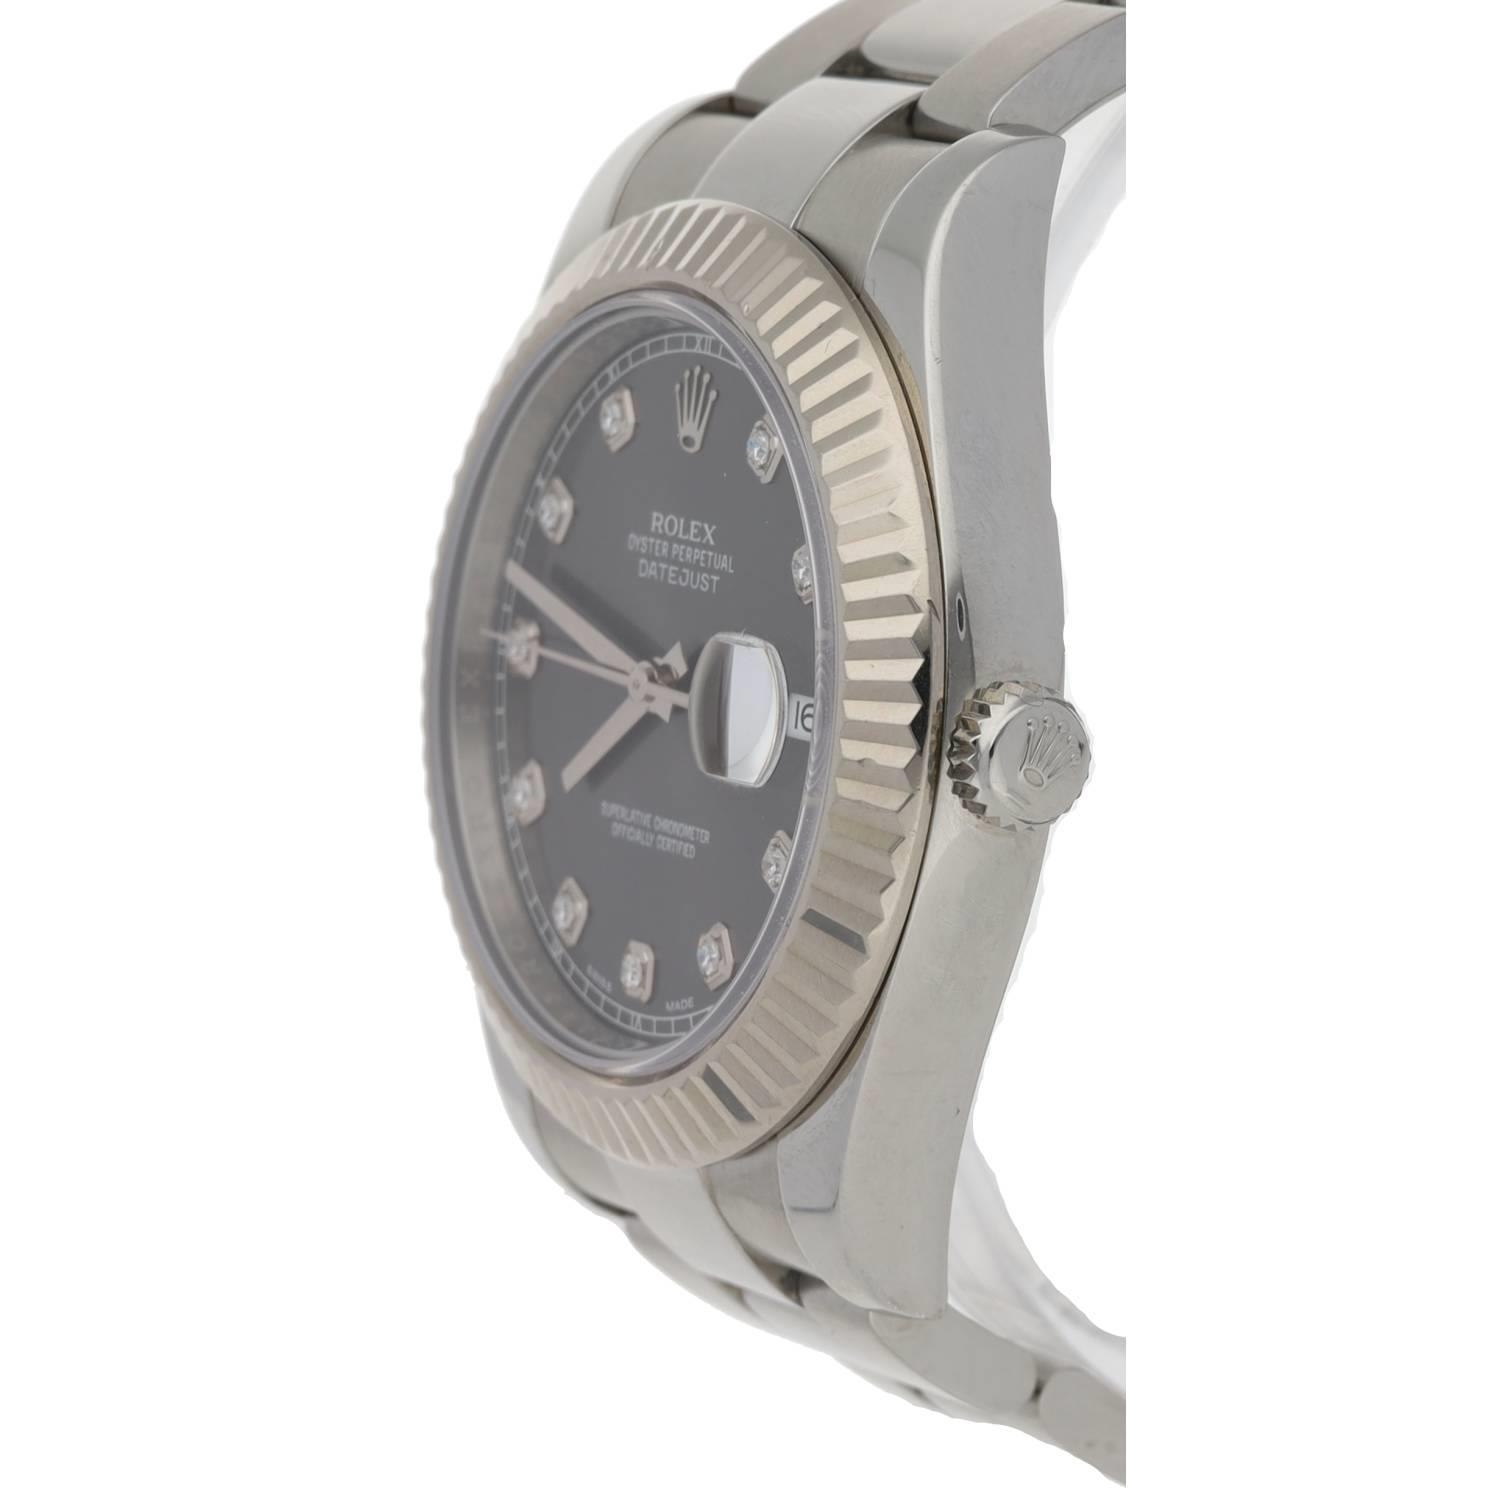 Rolex Oyster Perpetual Datejust II stainless steel and white gold gentleman's wristwatch, - Image 2 of 5